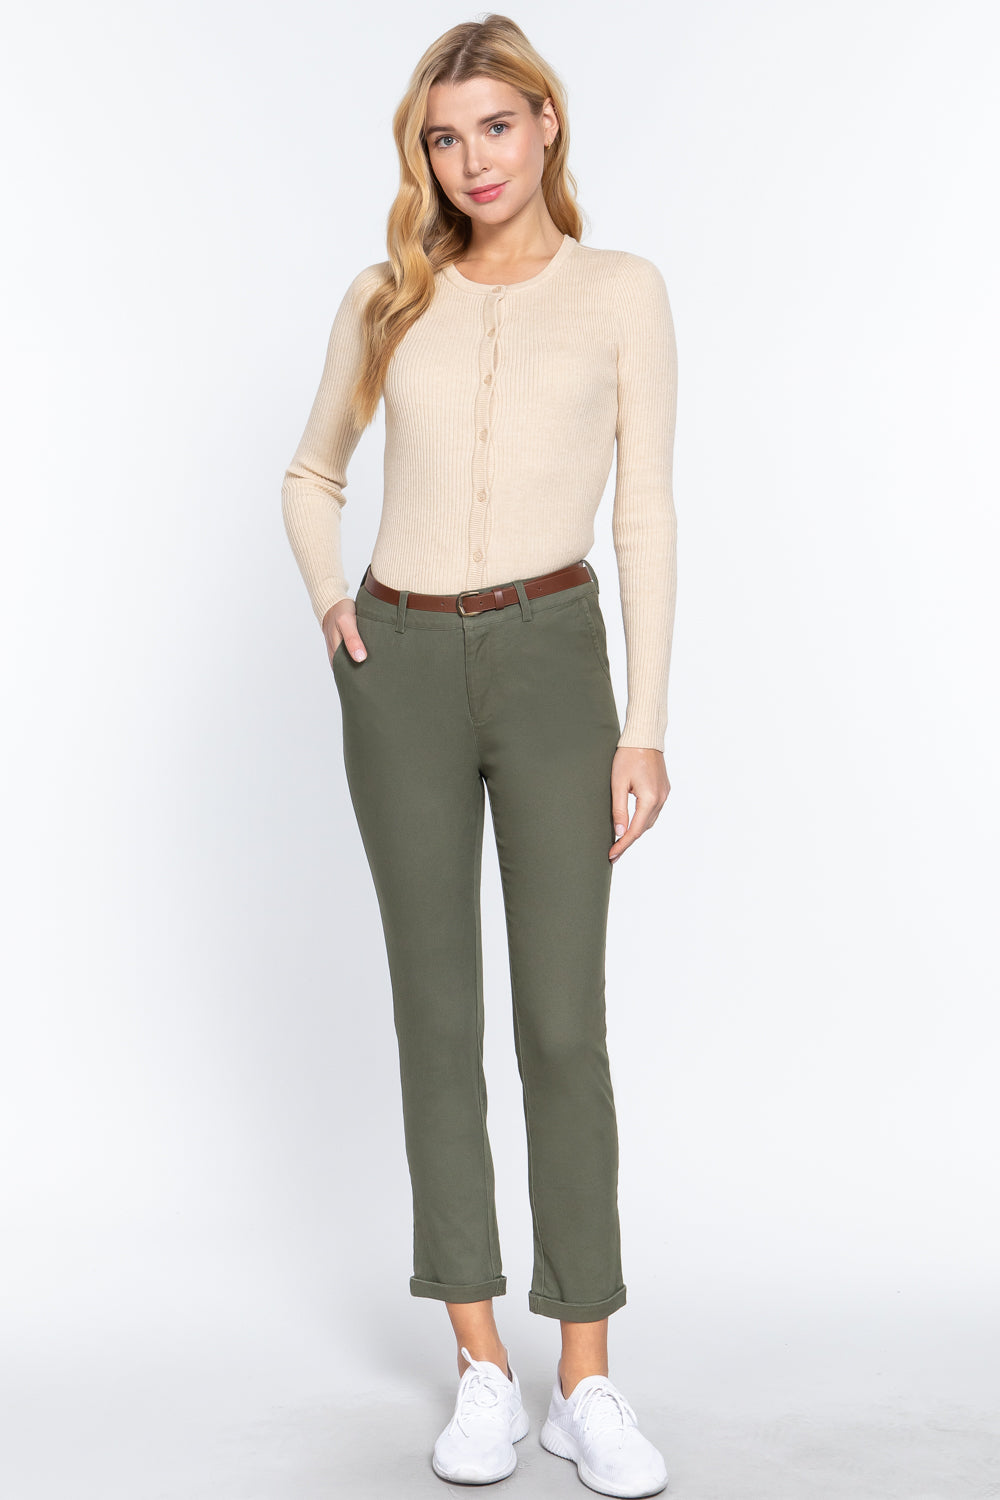 Cotton-span Twill Belted Long Pants